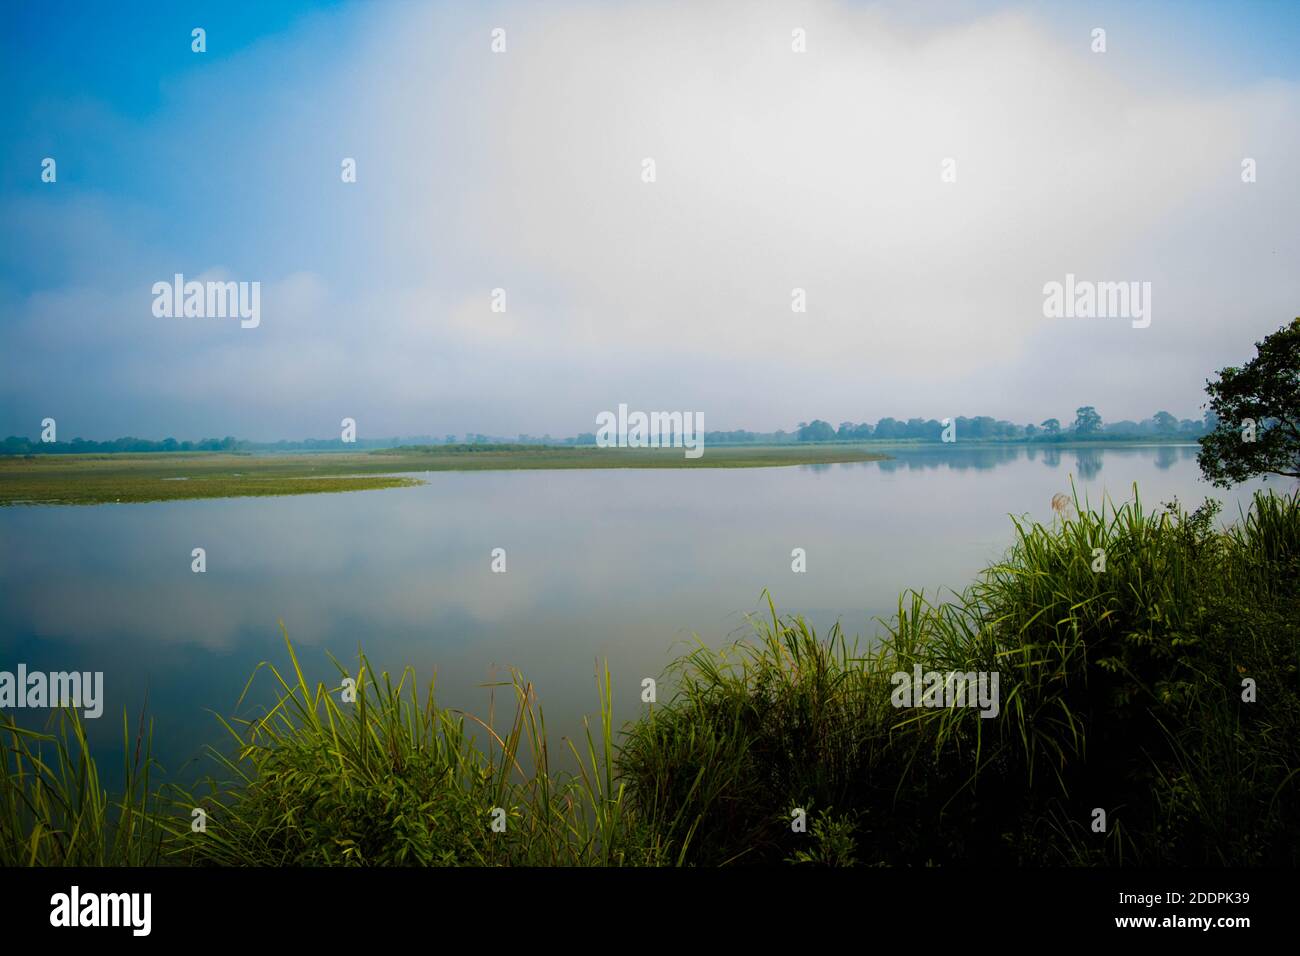 Landscape of lake and river in the morning time with fog at Kaziranga national park, Assam, India. Stock Photo